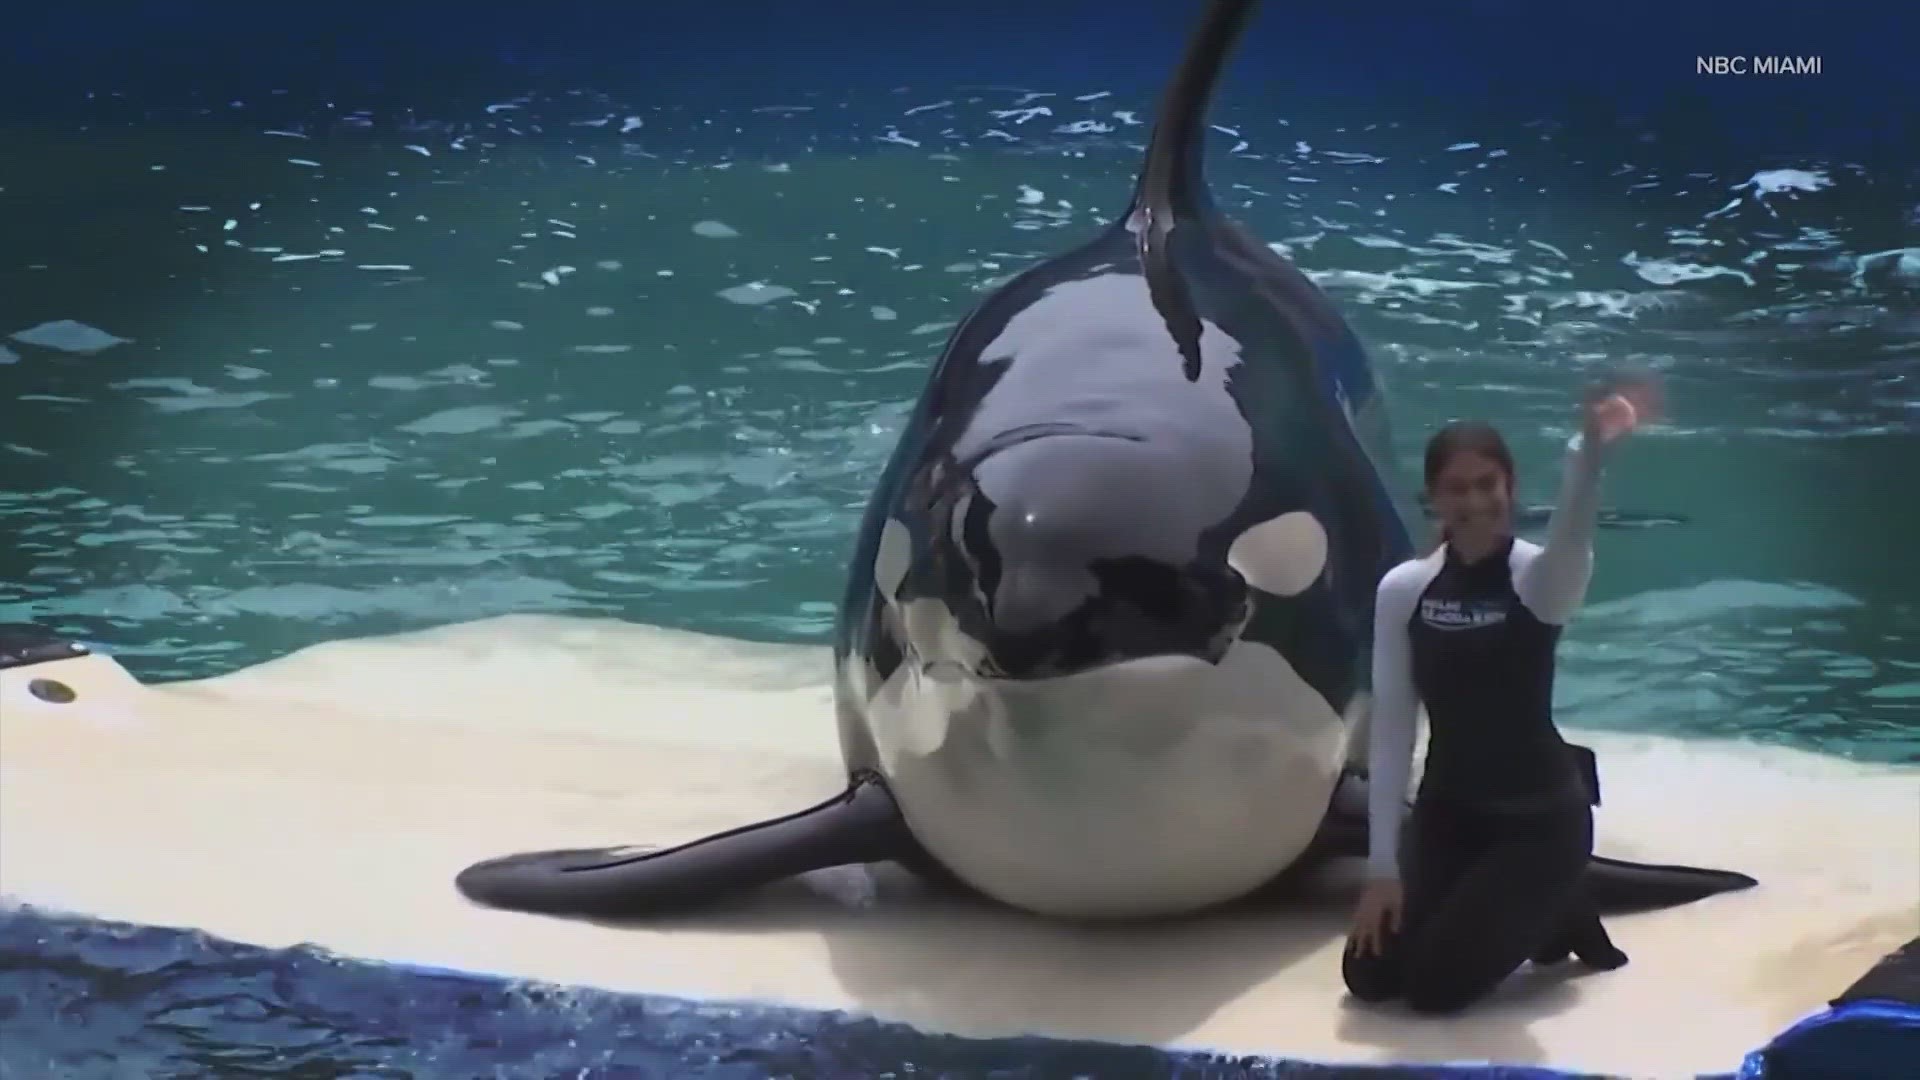 The Lummi Nation has been calling for Tokitae's return to the Salish Sea from a Miami aquarium after over 50 years of captivity